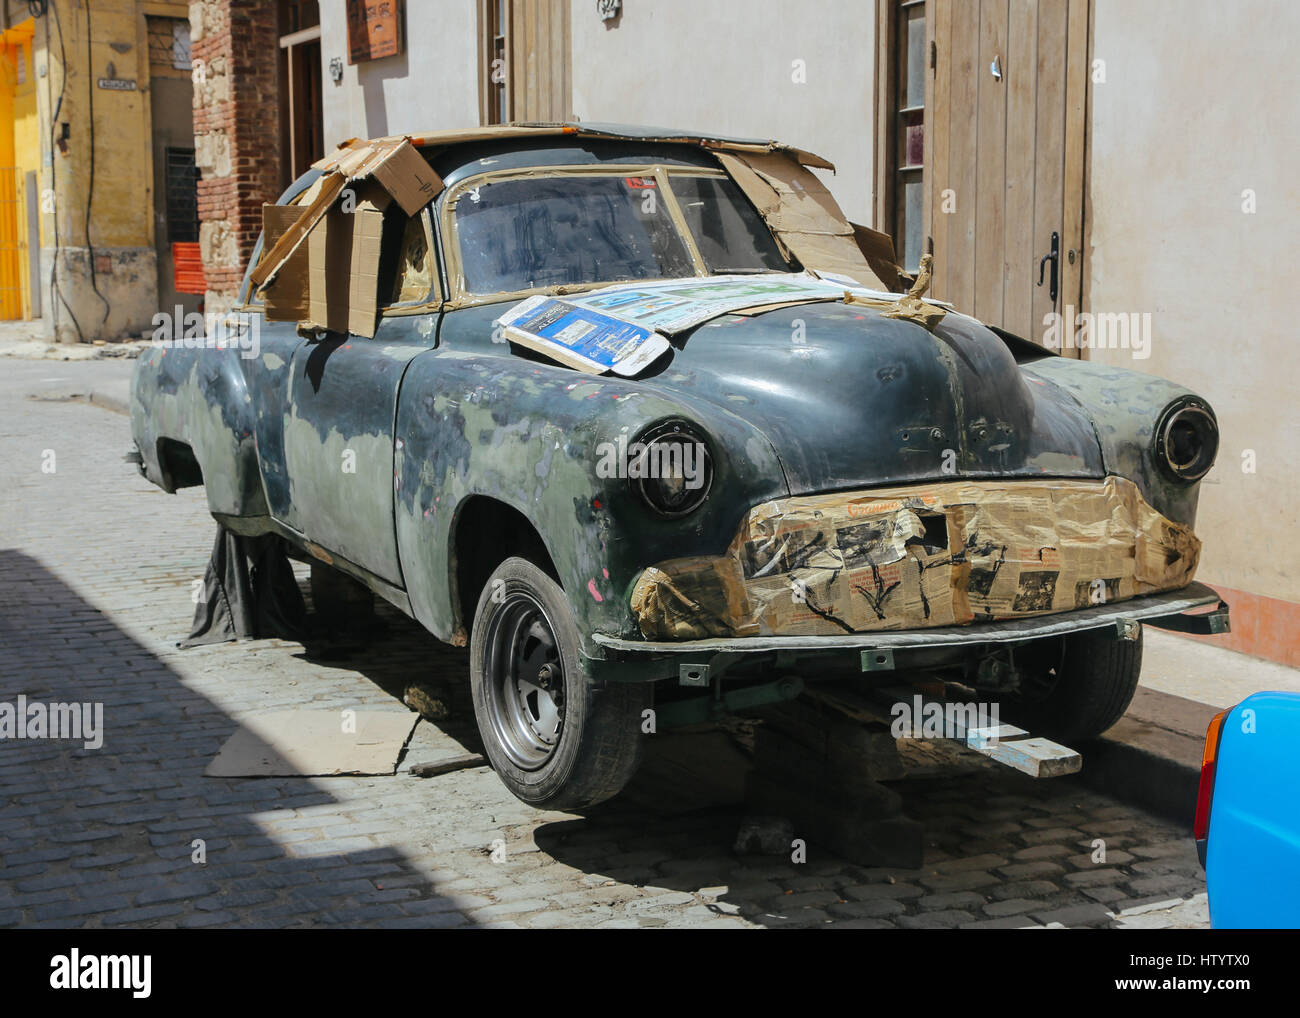 The shell of an Chevrolet car body undergoing restoration on the road side in Havana, Cuba Stock Photo